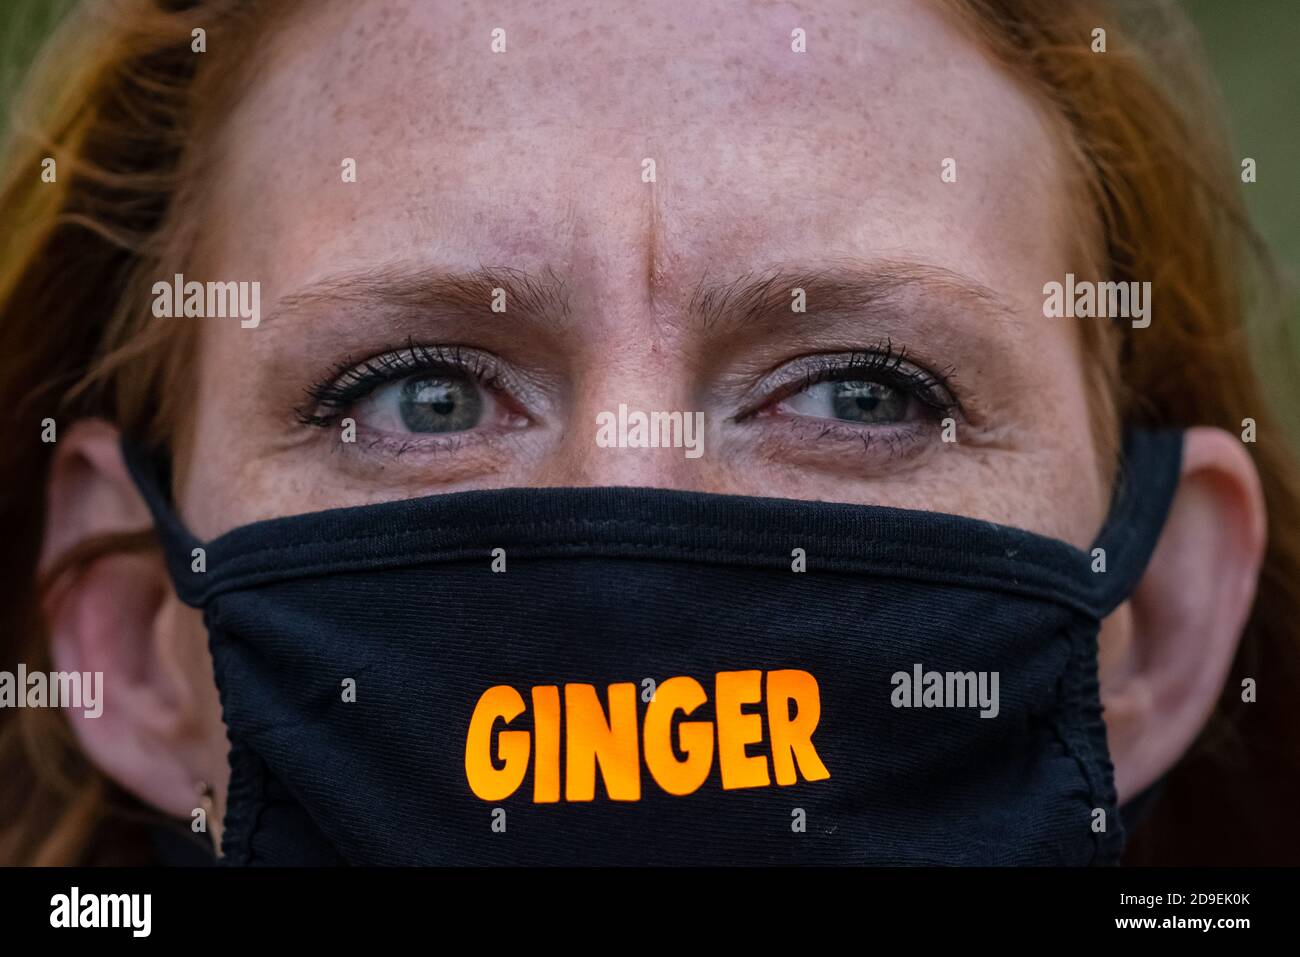 London, UK. 5th November, 2020. National Redhead Day. A red-headed lady passes through St. James' Park with a face mask entitled 'Ginger Lives Matter'. Celebrated annually on 5th Nov, National Redhead day would usually see a large gathering of 'gingers' from across the UK joining in celebration of the uniqueness of red hair. Credit: Guy Corbishley/Alamy Live News Stock Photo